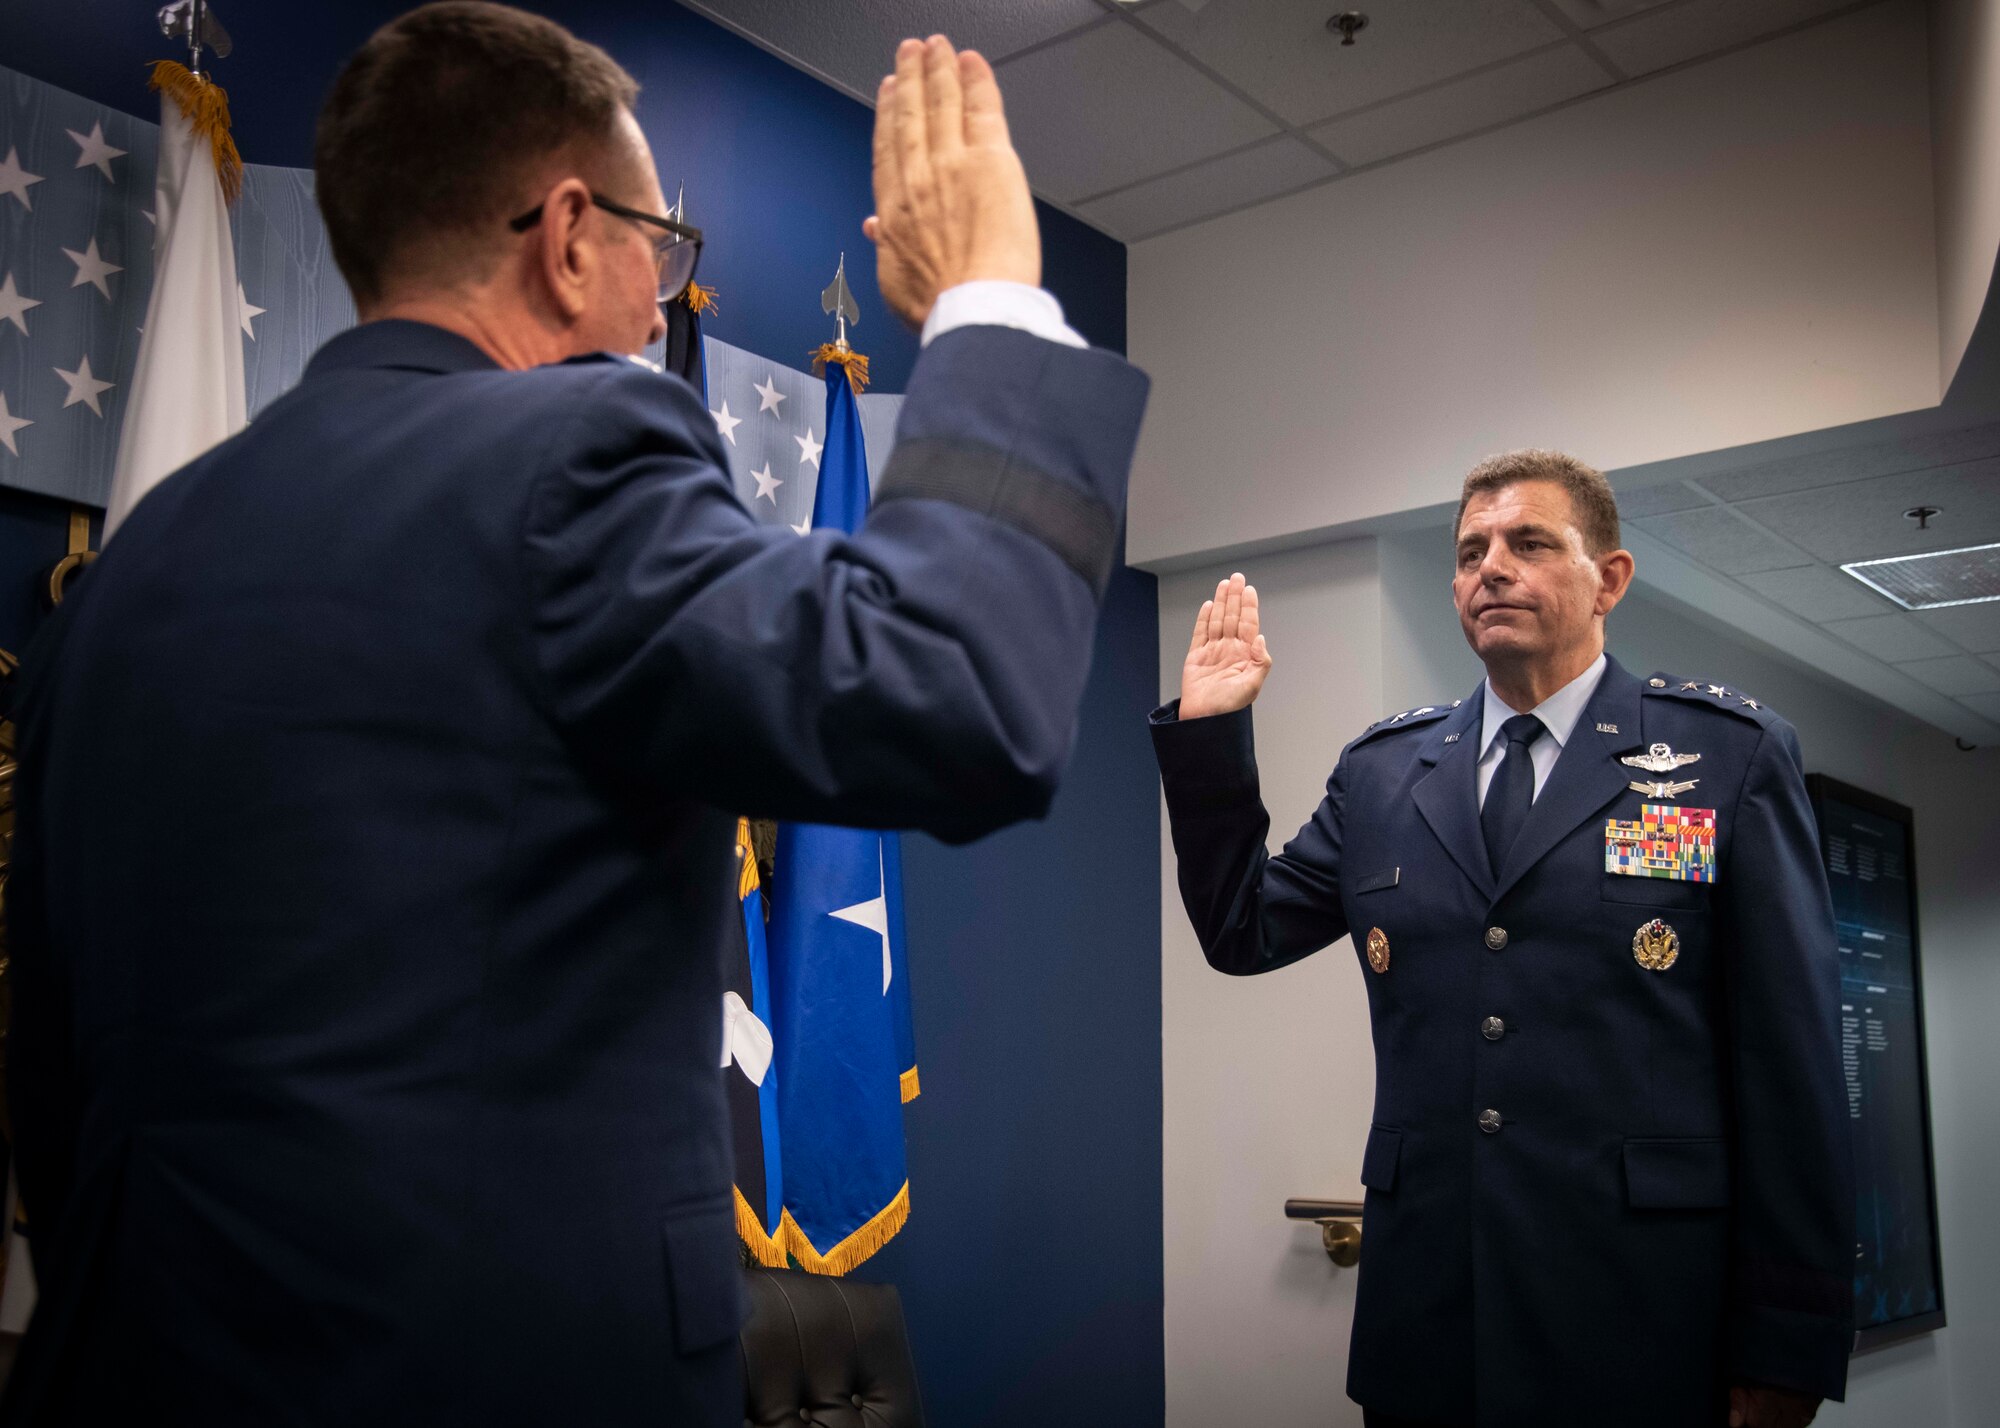 U.S. Air Force Gen. Joseph L. Lengyel, the 28th Chief of the National Guard Bureau, conducts a transition of responsibility order for newly promoted Lt. Gen. Michael A. Loh during a Change of Responsibility ceremony at the Pentagon July 28, 2020. During the ceremony, Loh assumed responsibility as the 13th director of the Air National Guard and was promoted to the rank of lieutenant general. (U.S. Air National Guard photo by Technical Sgt. Morgan R. Lipinski)